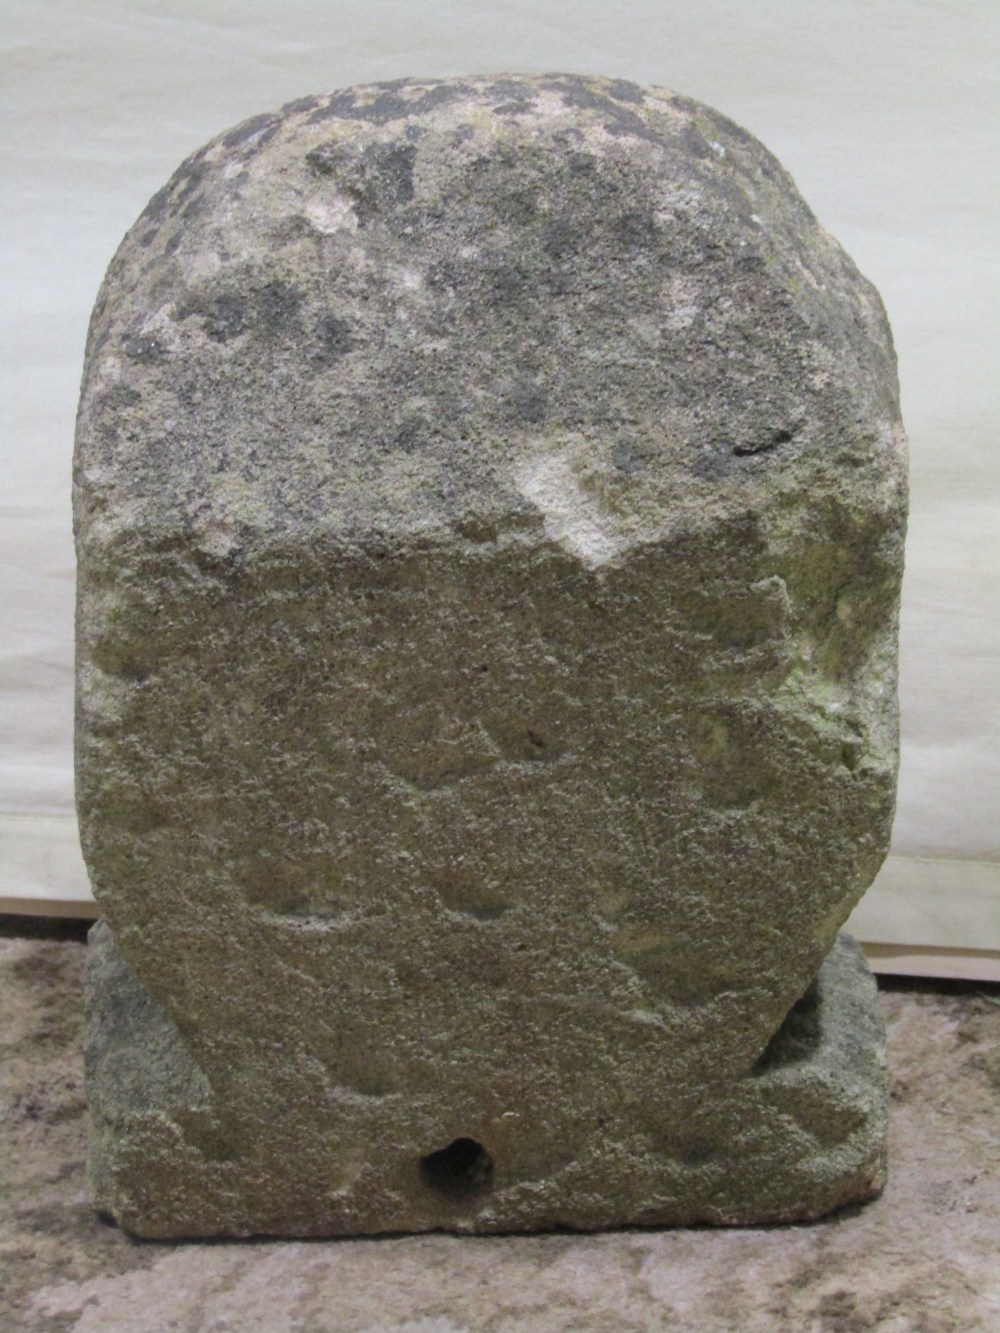 Antique stone corbel in the form of a face, 23cm high - Image 2 of 2